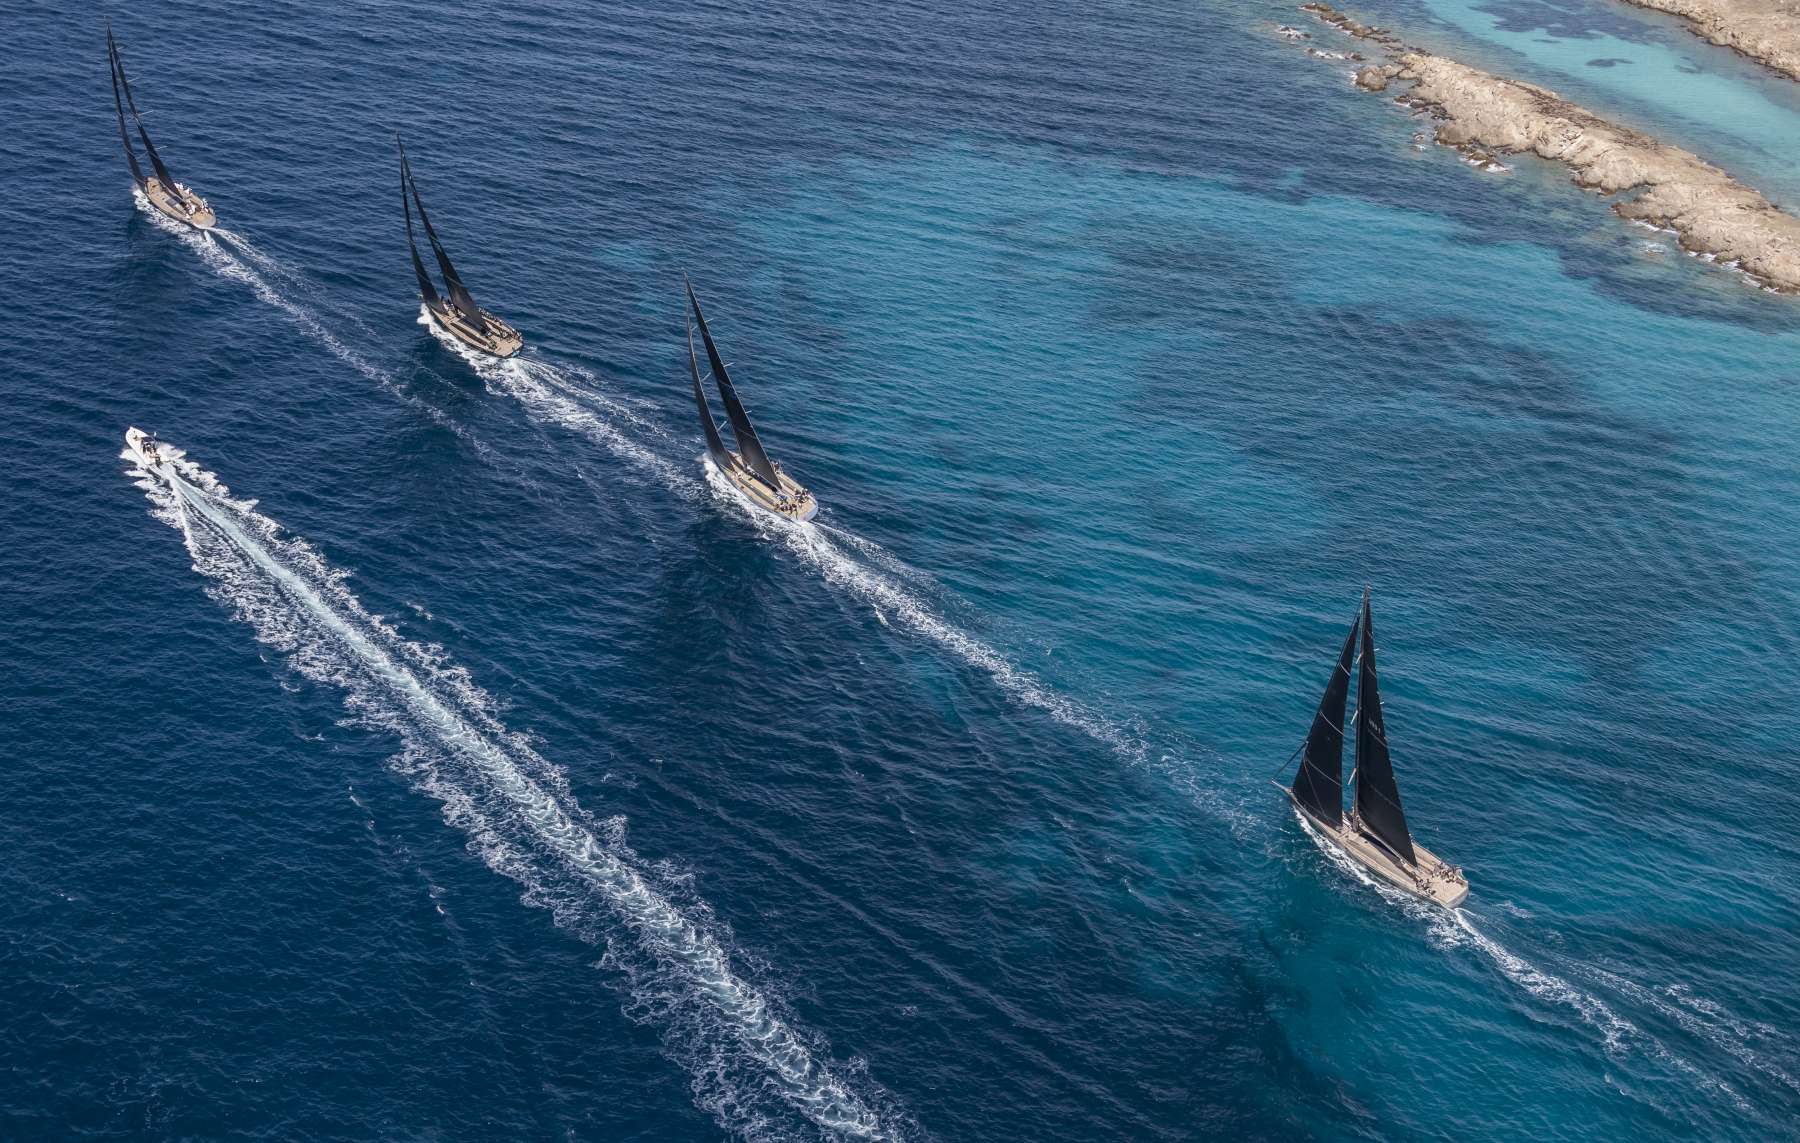 Maxi Yacht Rolex Cup & Rolex Maxi 72 Worlds - Images race Day 1 online  - NEWS - Yacht Club Costa Smeralda